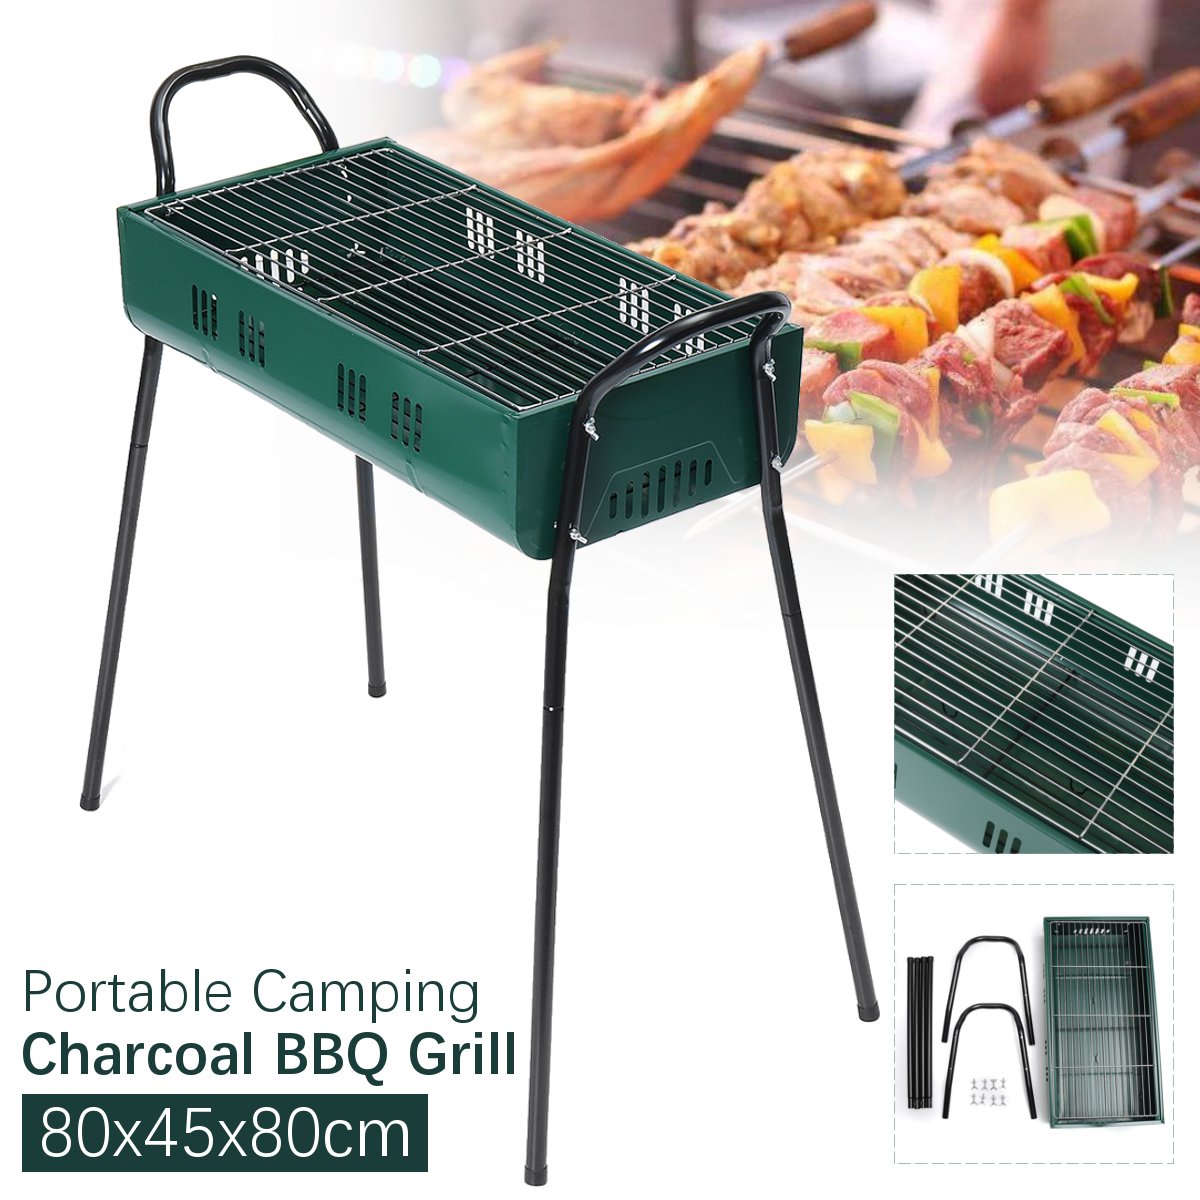 80x45x80cm-Portable-Charcoal-BBQ-Grill-Iron-Stove-Kebab-Barbecue-Patio-Camping-1697256-2